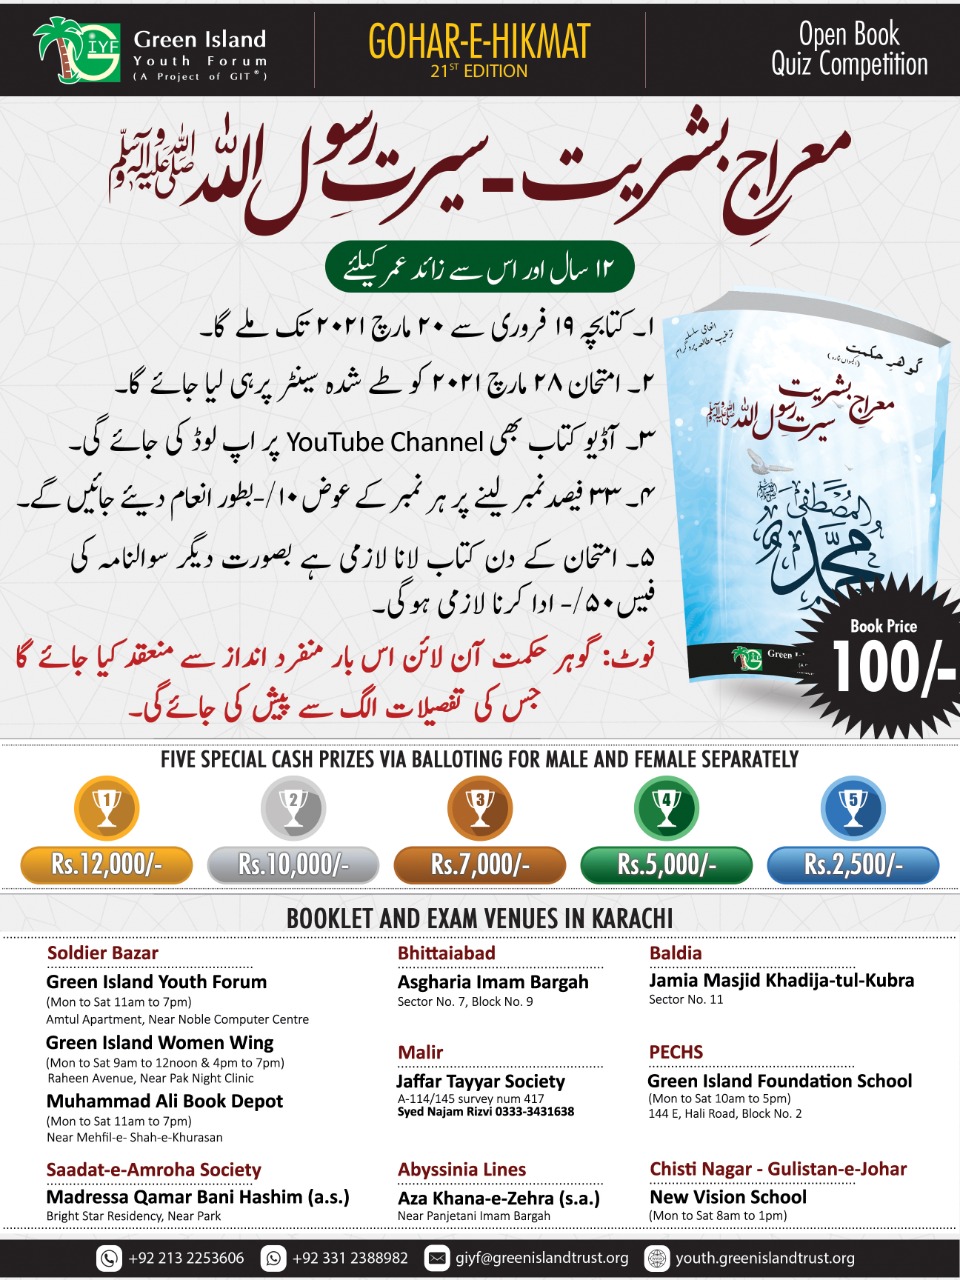 Gohar-e-Hikmat - 21st Edition (Physical Book Reading Competition)